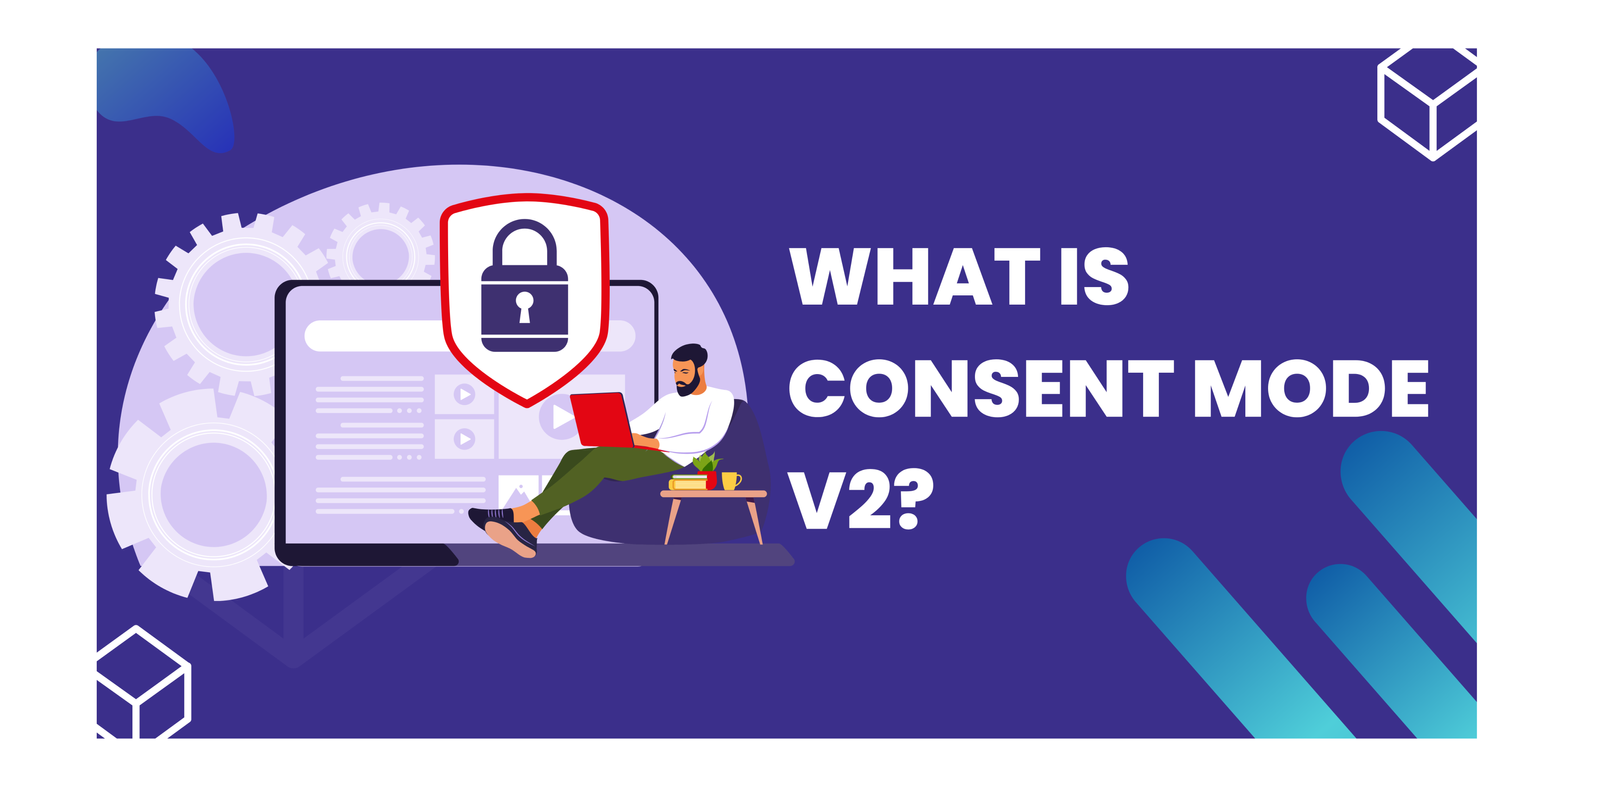 What is Consent Mode V2?